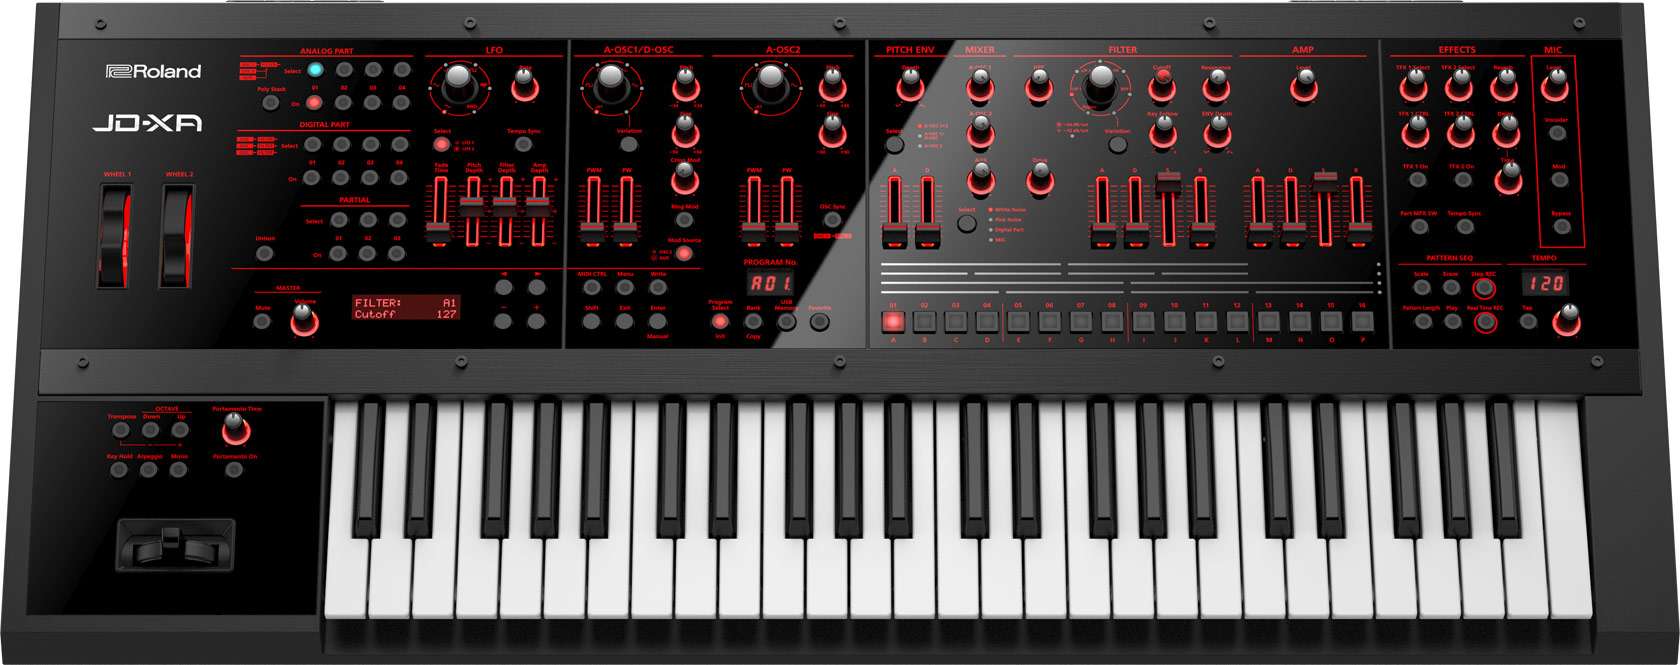 Types of synthesizers and their differences